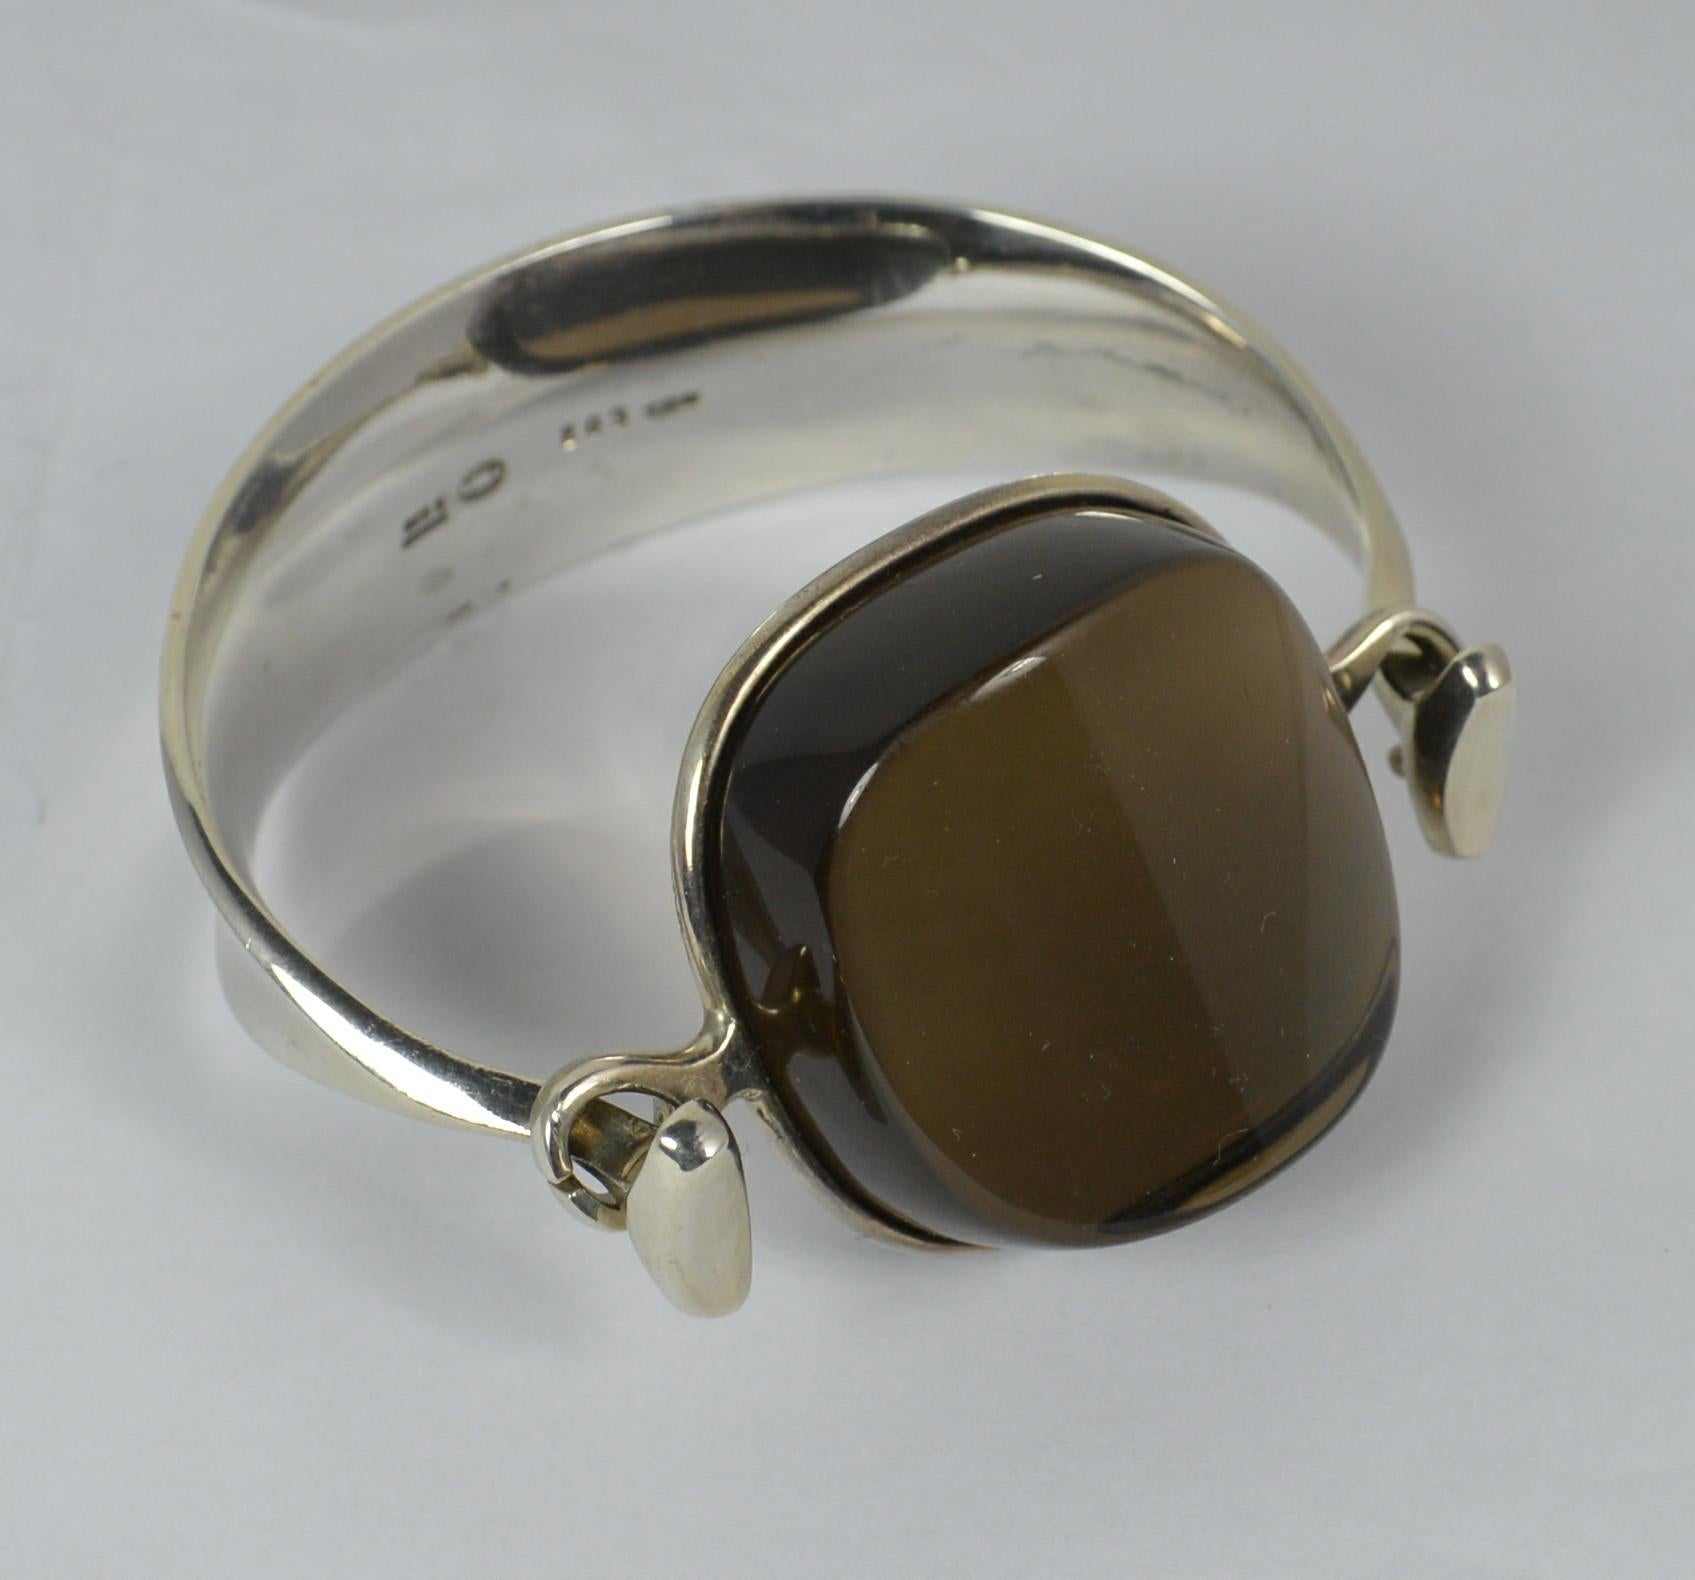 A beautiful Georg Jensen bangle.
Sterling silver example.
Set with a huge single smoky quartz stone.
Model number 203.

Hallmarks ; Torun, 203, Georg Jensen, full marks
Weight ; 78 grams
Size ; 34mm x 33mm stone. 6 1/2 inner circumference
Condition